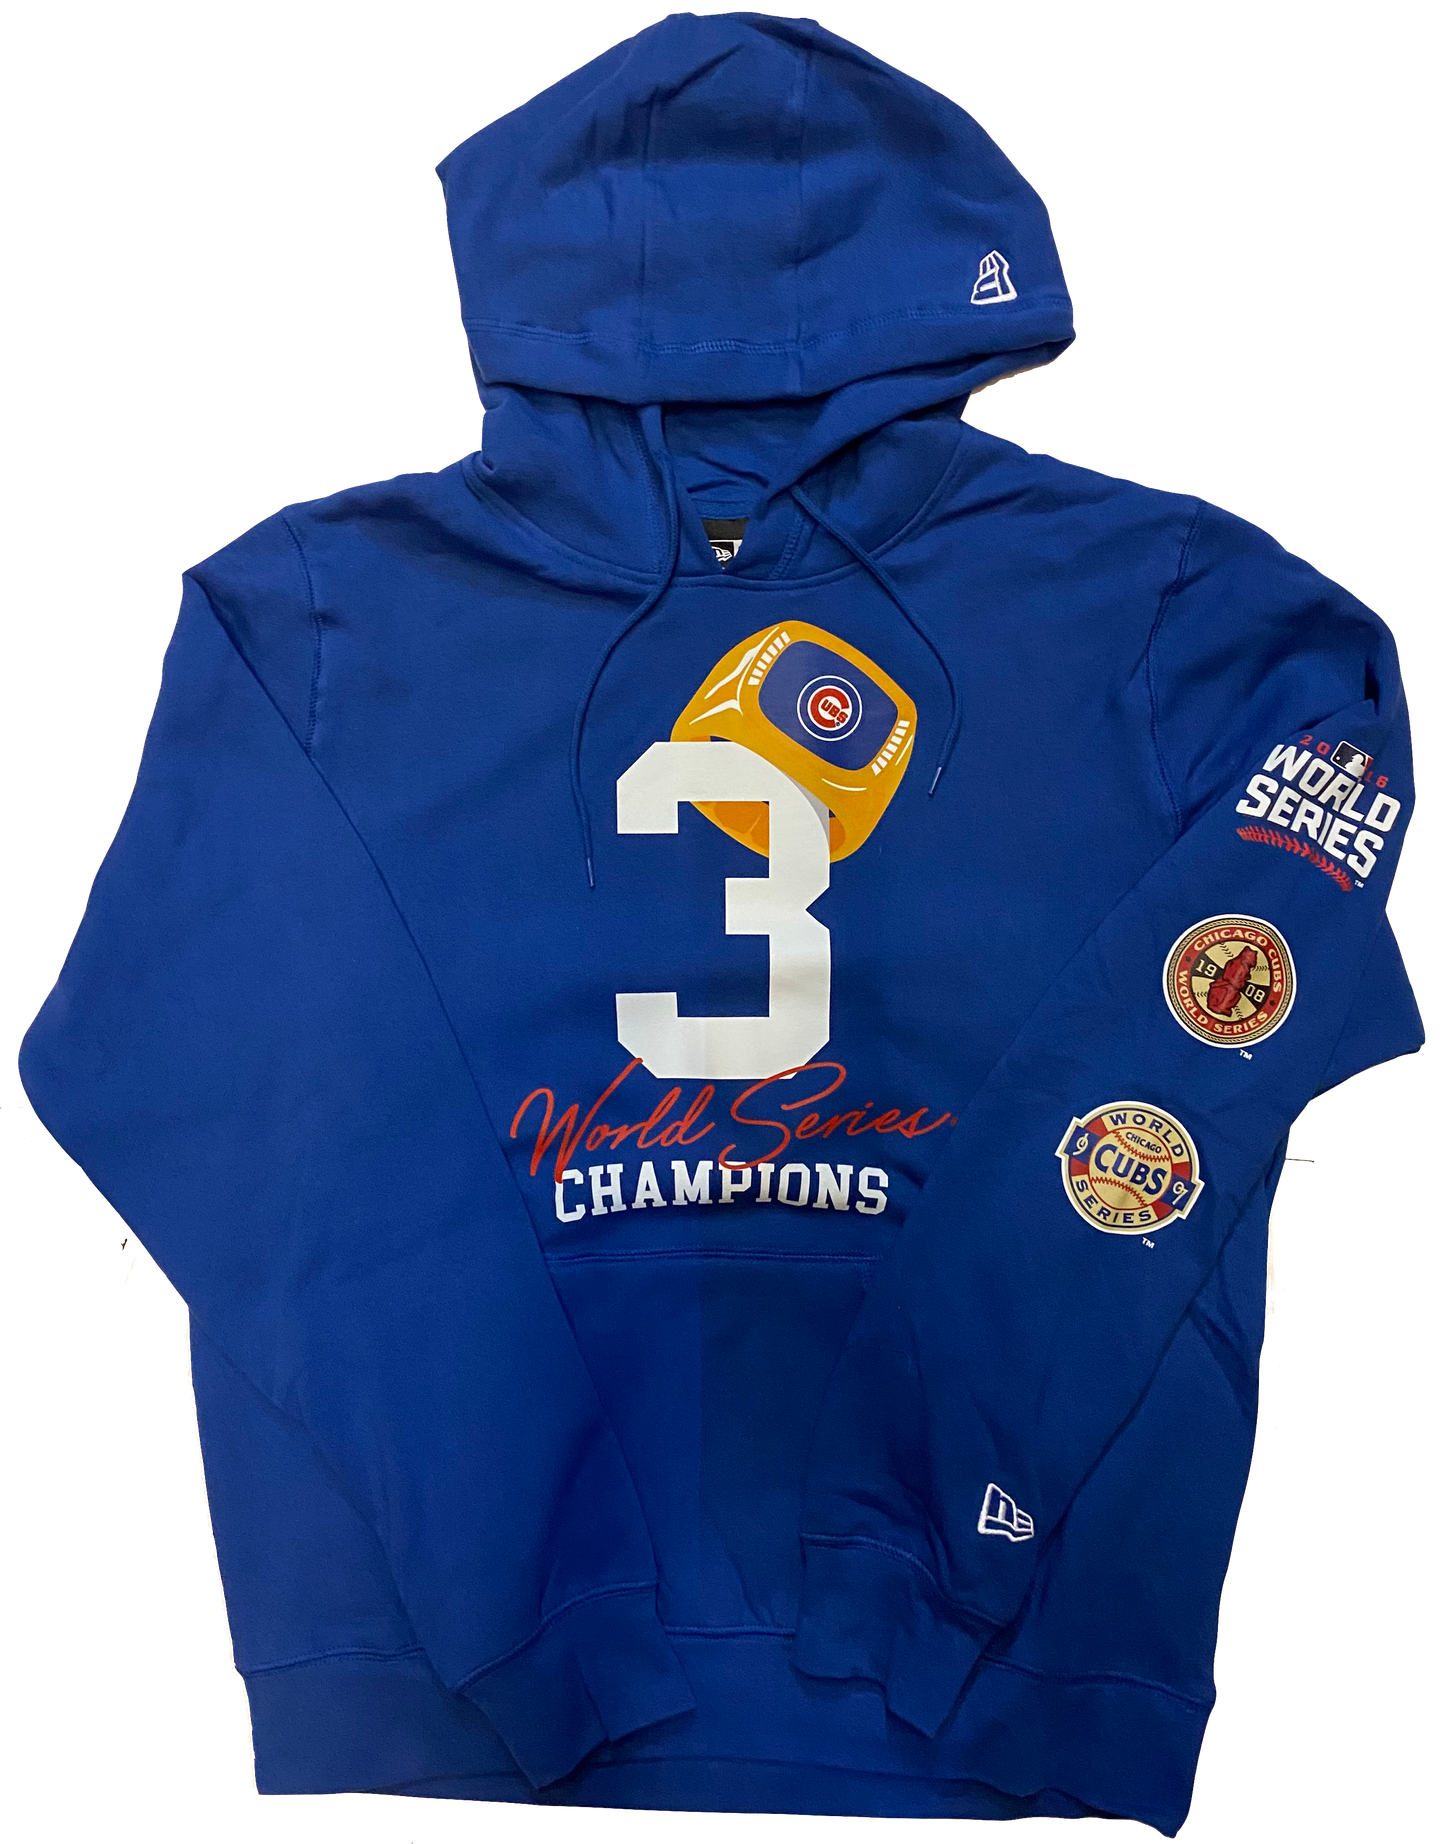 Mens Chicago Cubs New Era 3 Rings World Series Champions Hoodie